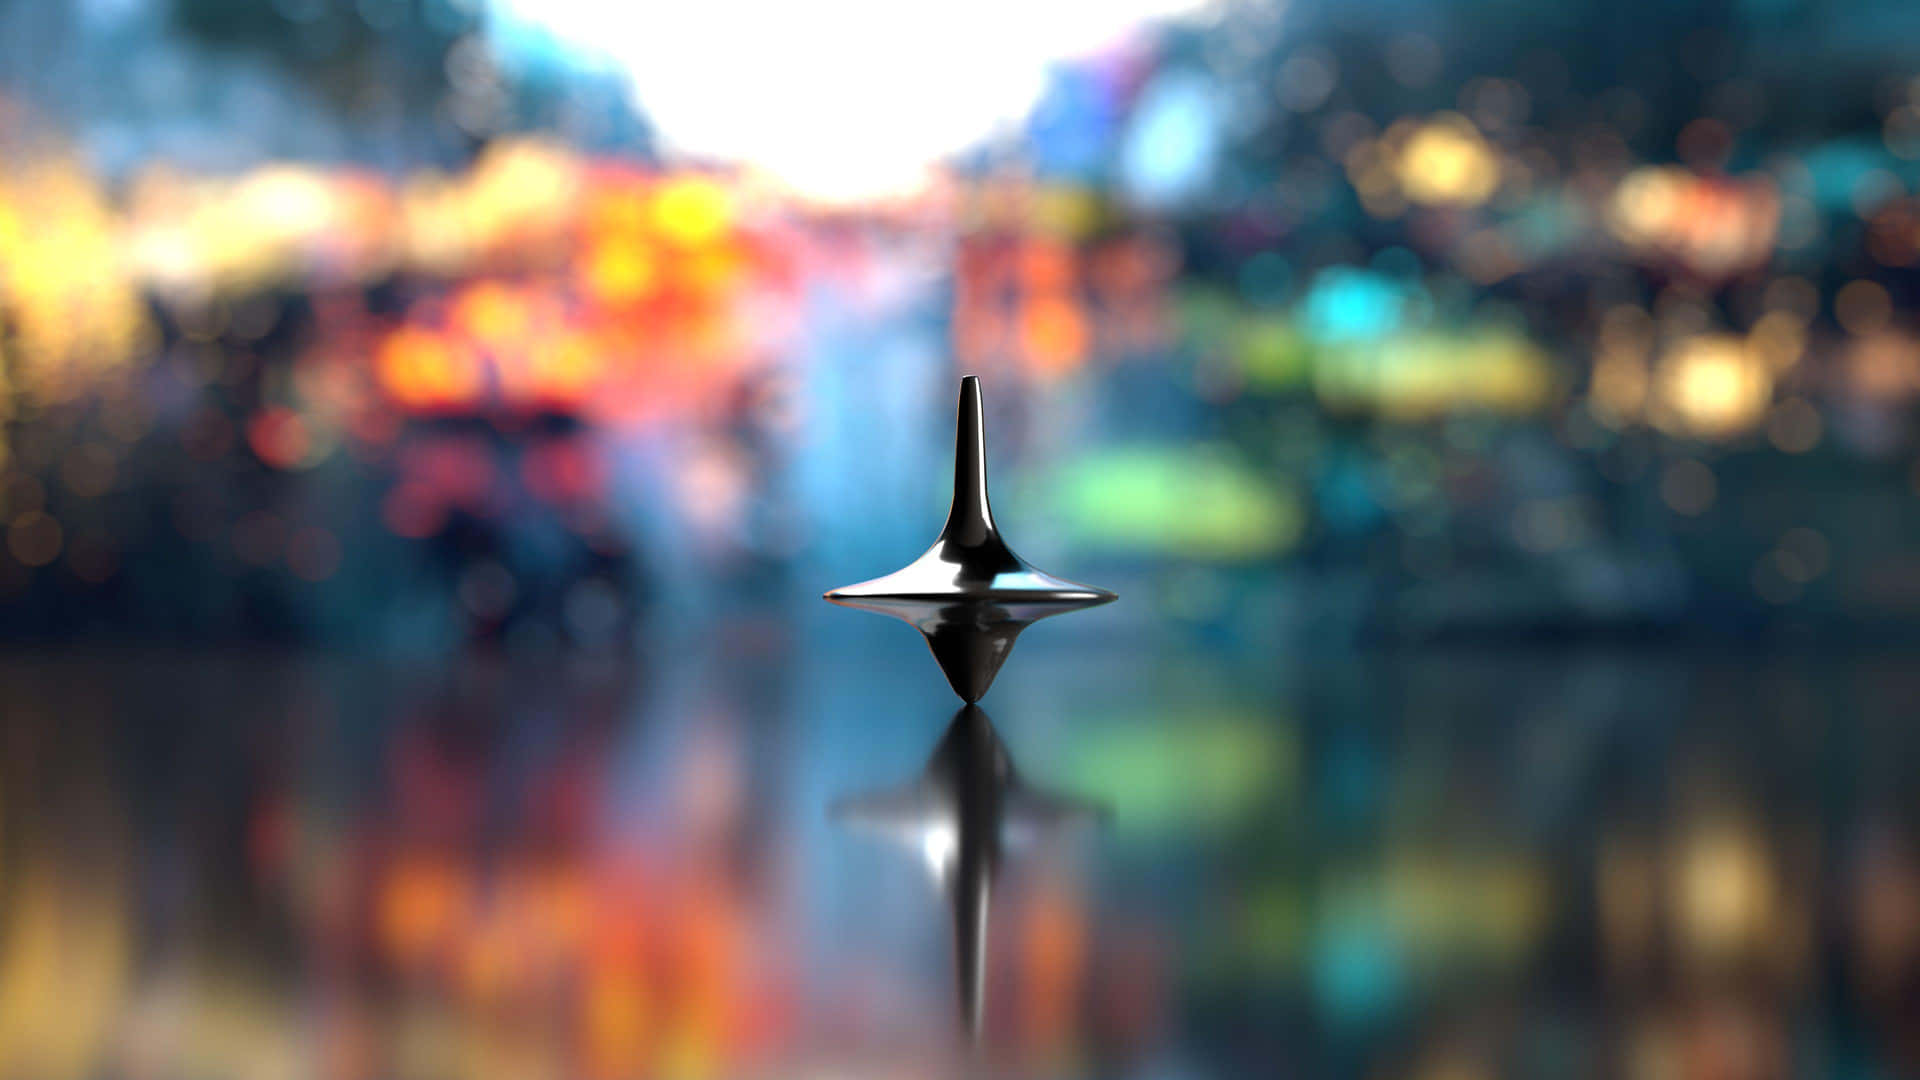 Spinning Top Dreamscape Wallpaper